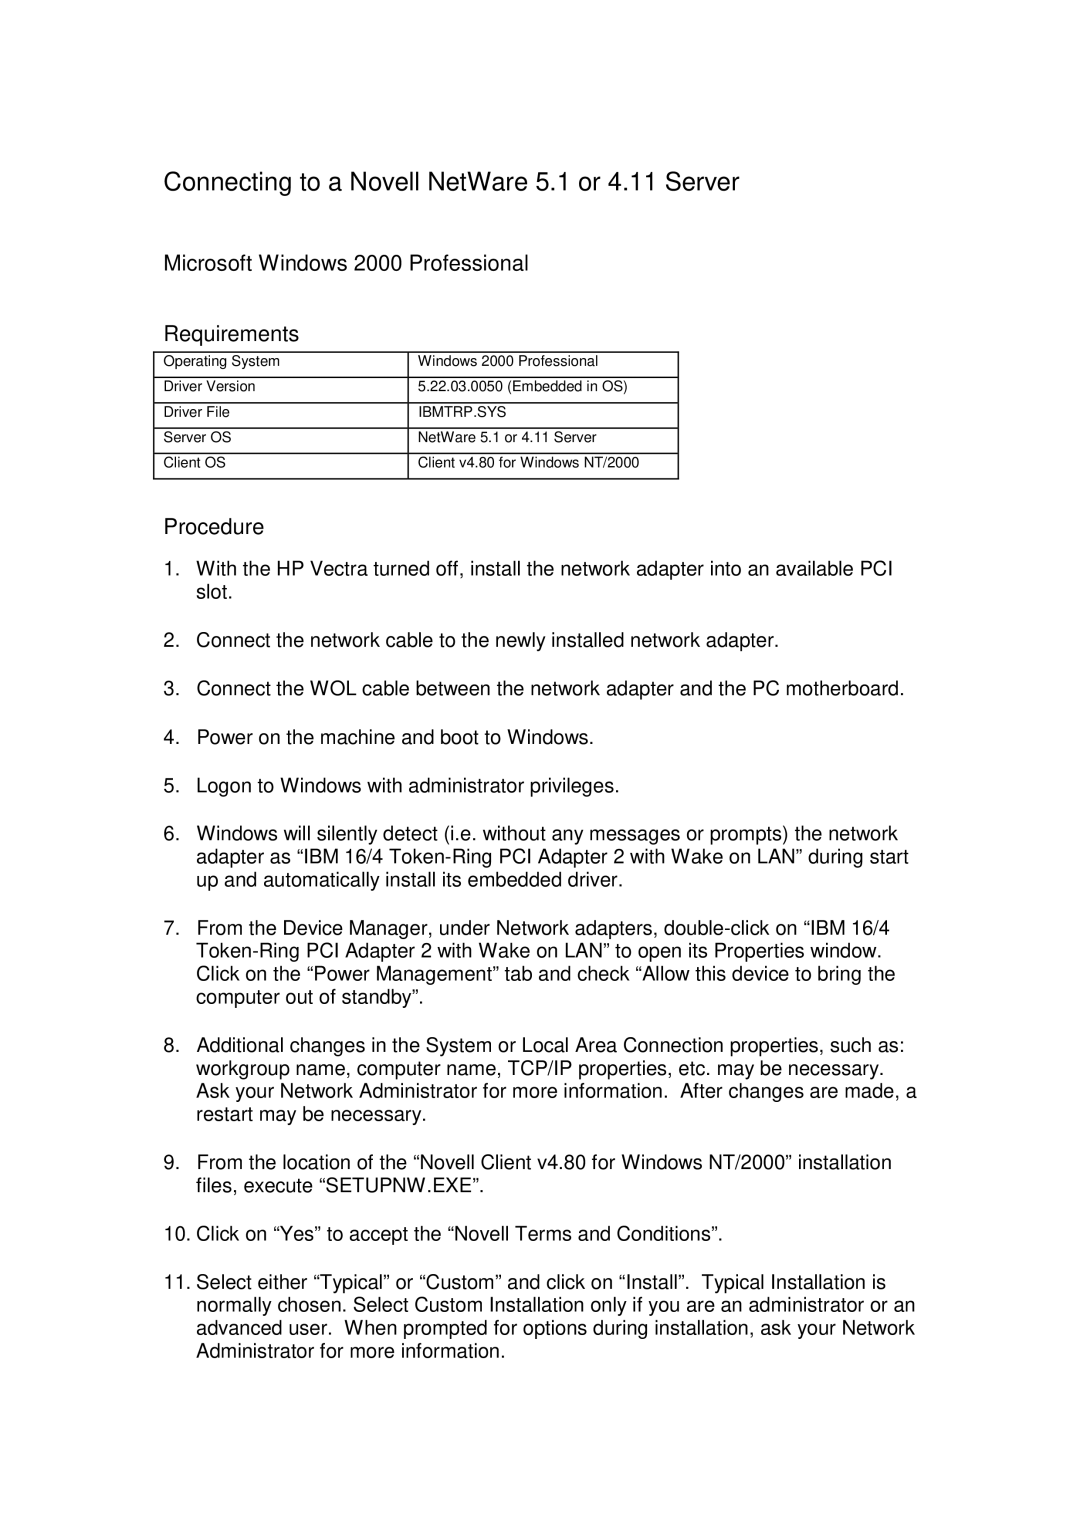 IBM WL2 Microsoft Windows 2000 Professional Requirements, Connecting to a Novell NetWare 5.1 or 4.11 Server, Procedure 